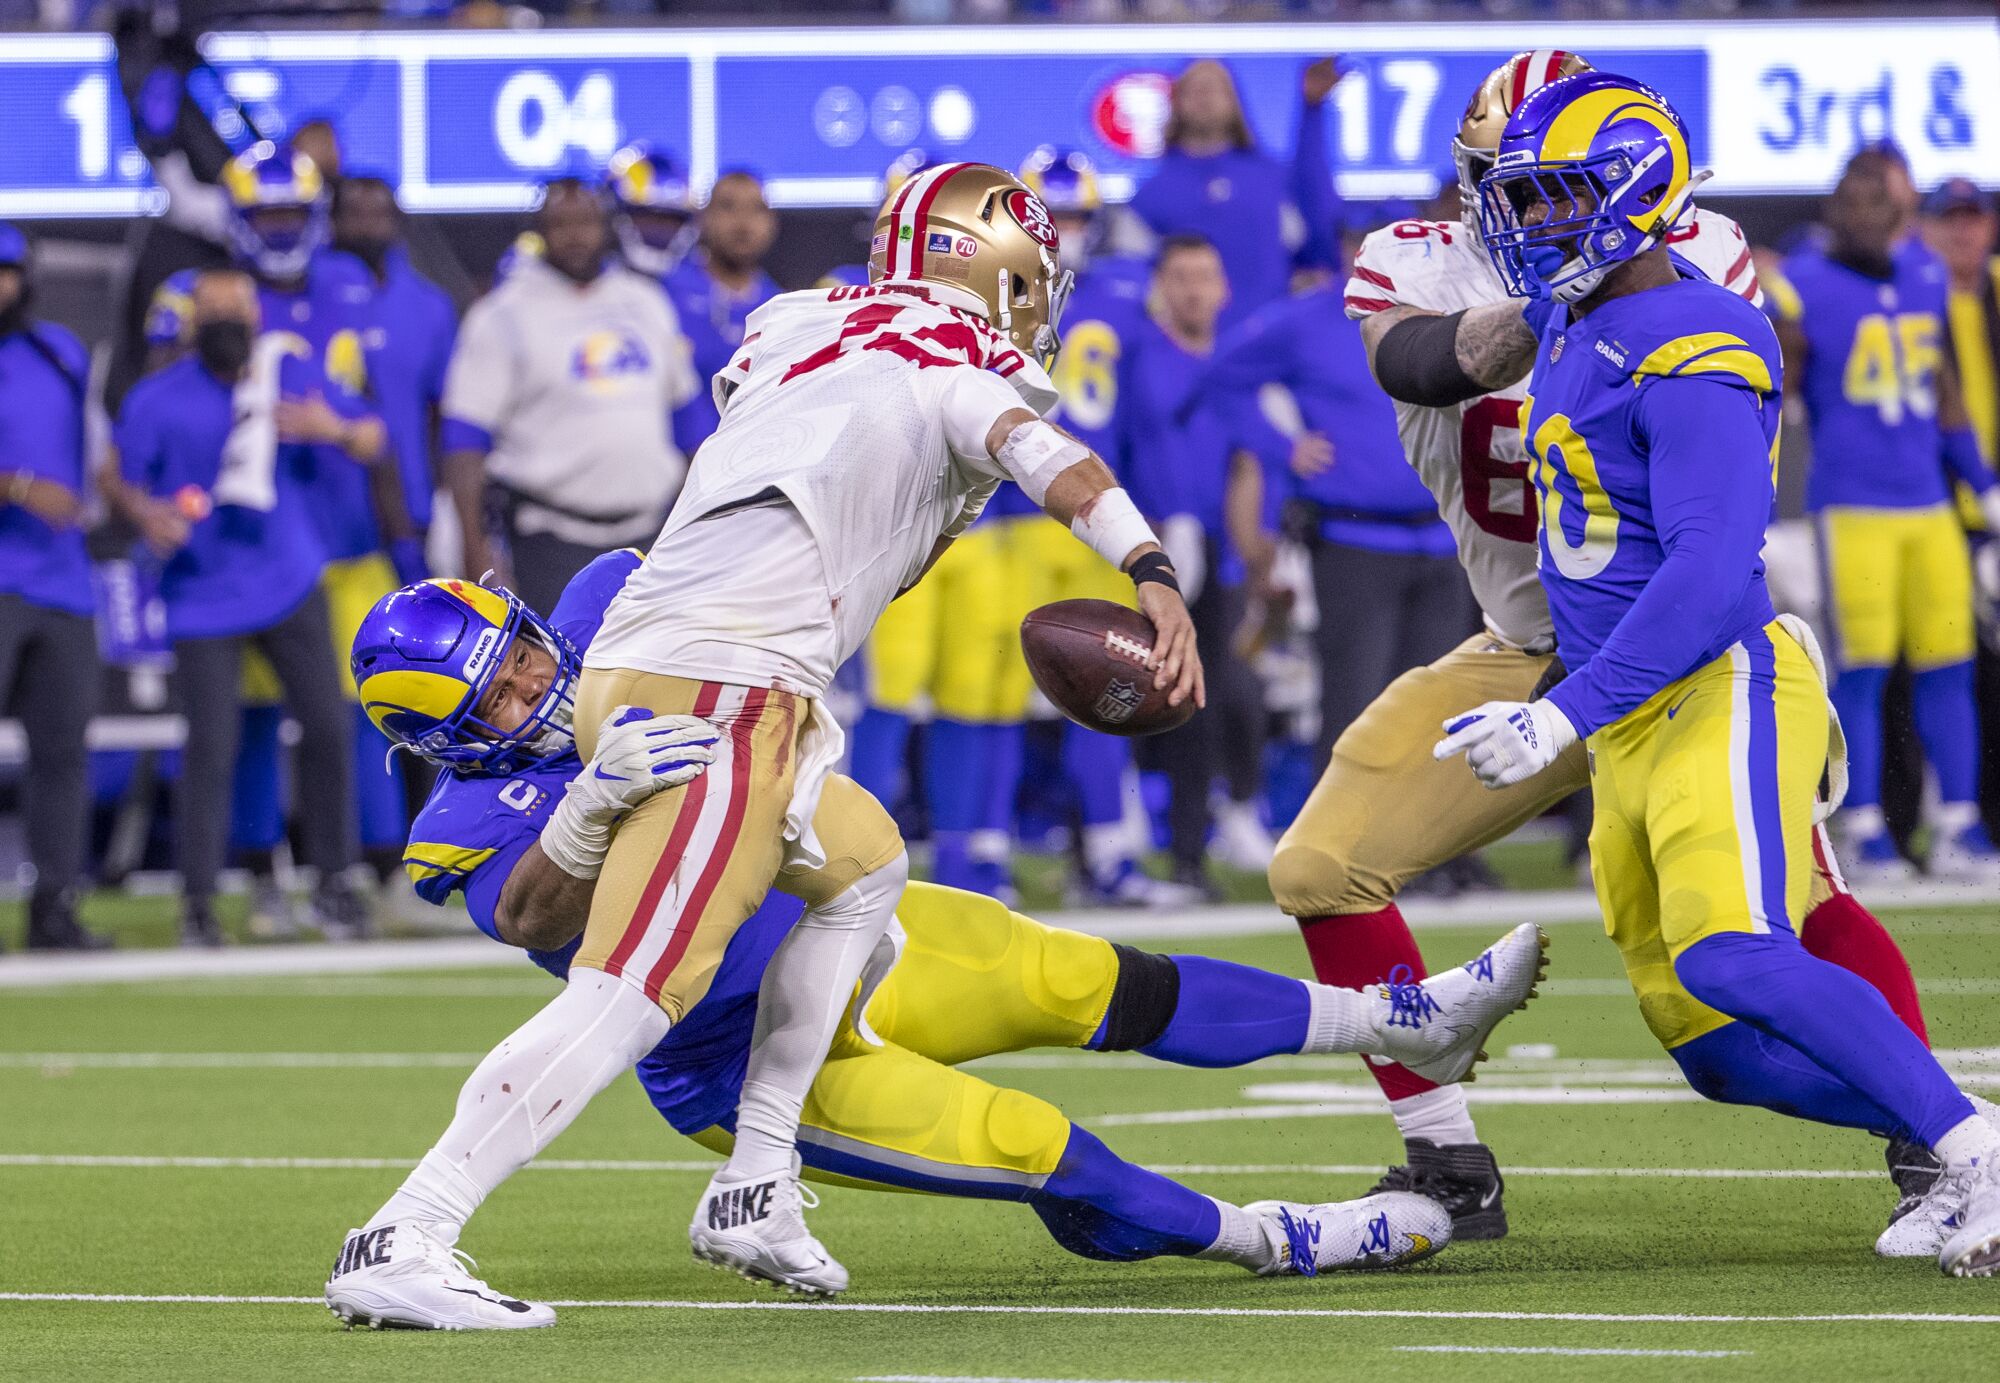 Rams defensive end Aaron Donald pressures 49ers quarterback Jimmy Garoppolo late in the fourth quarter.